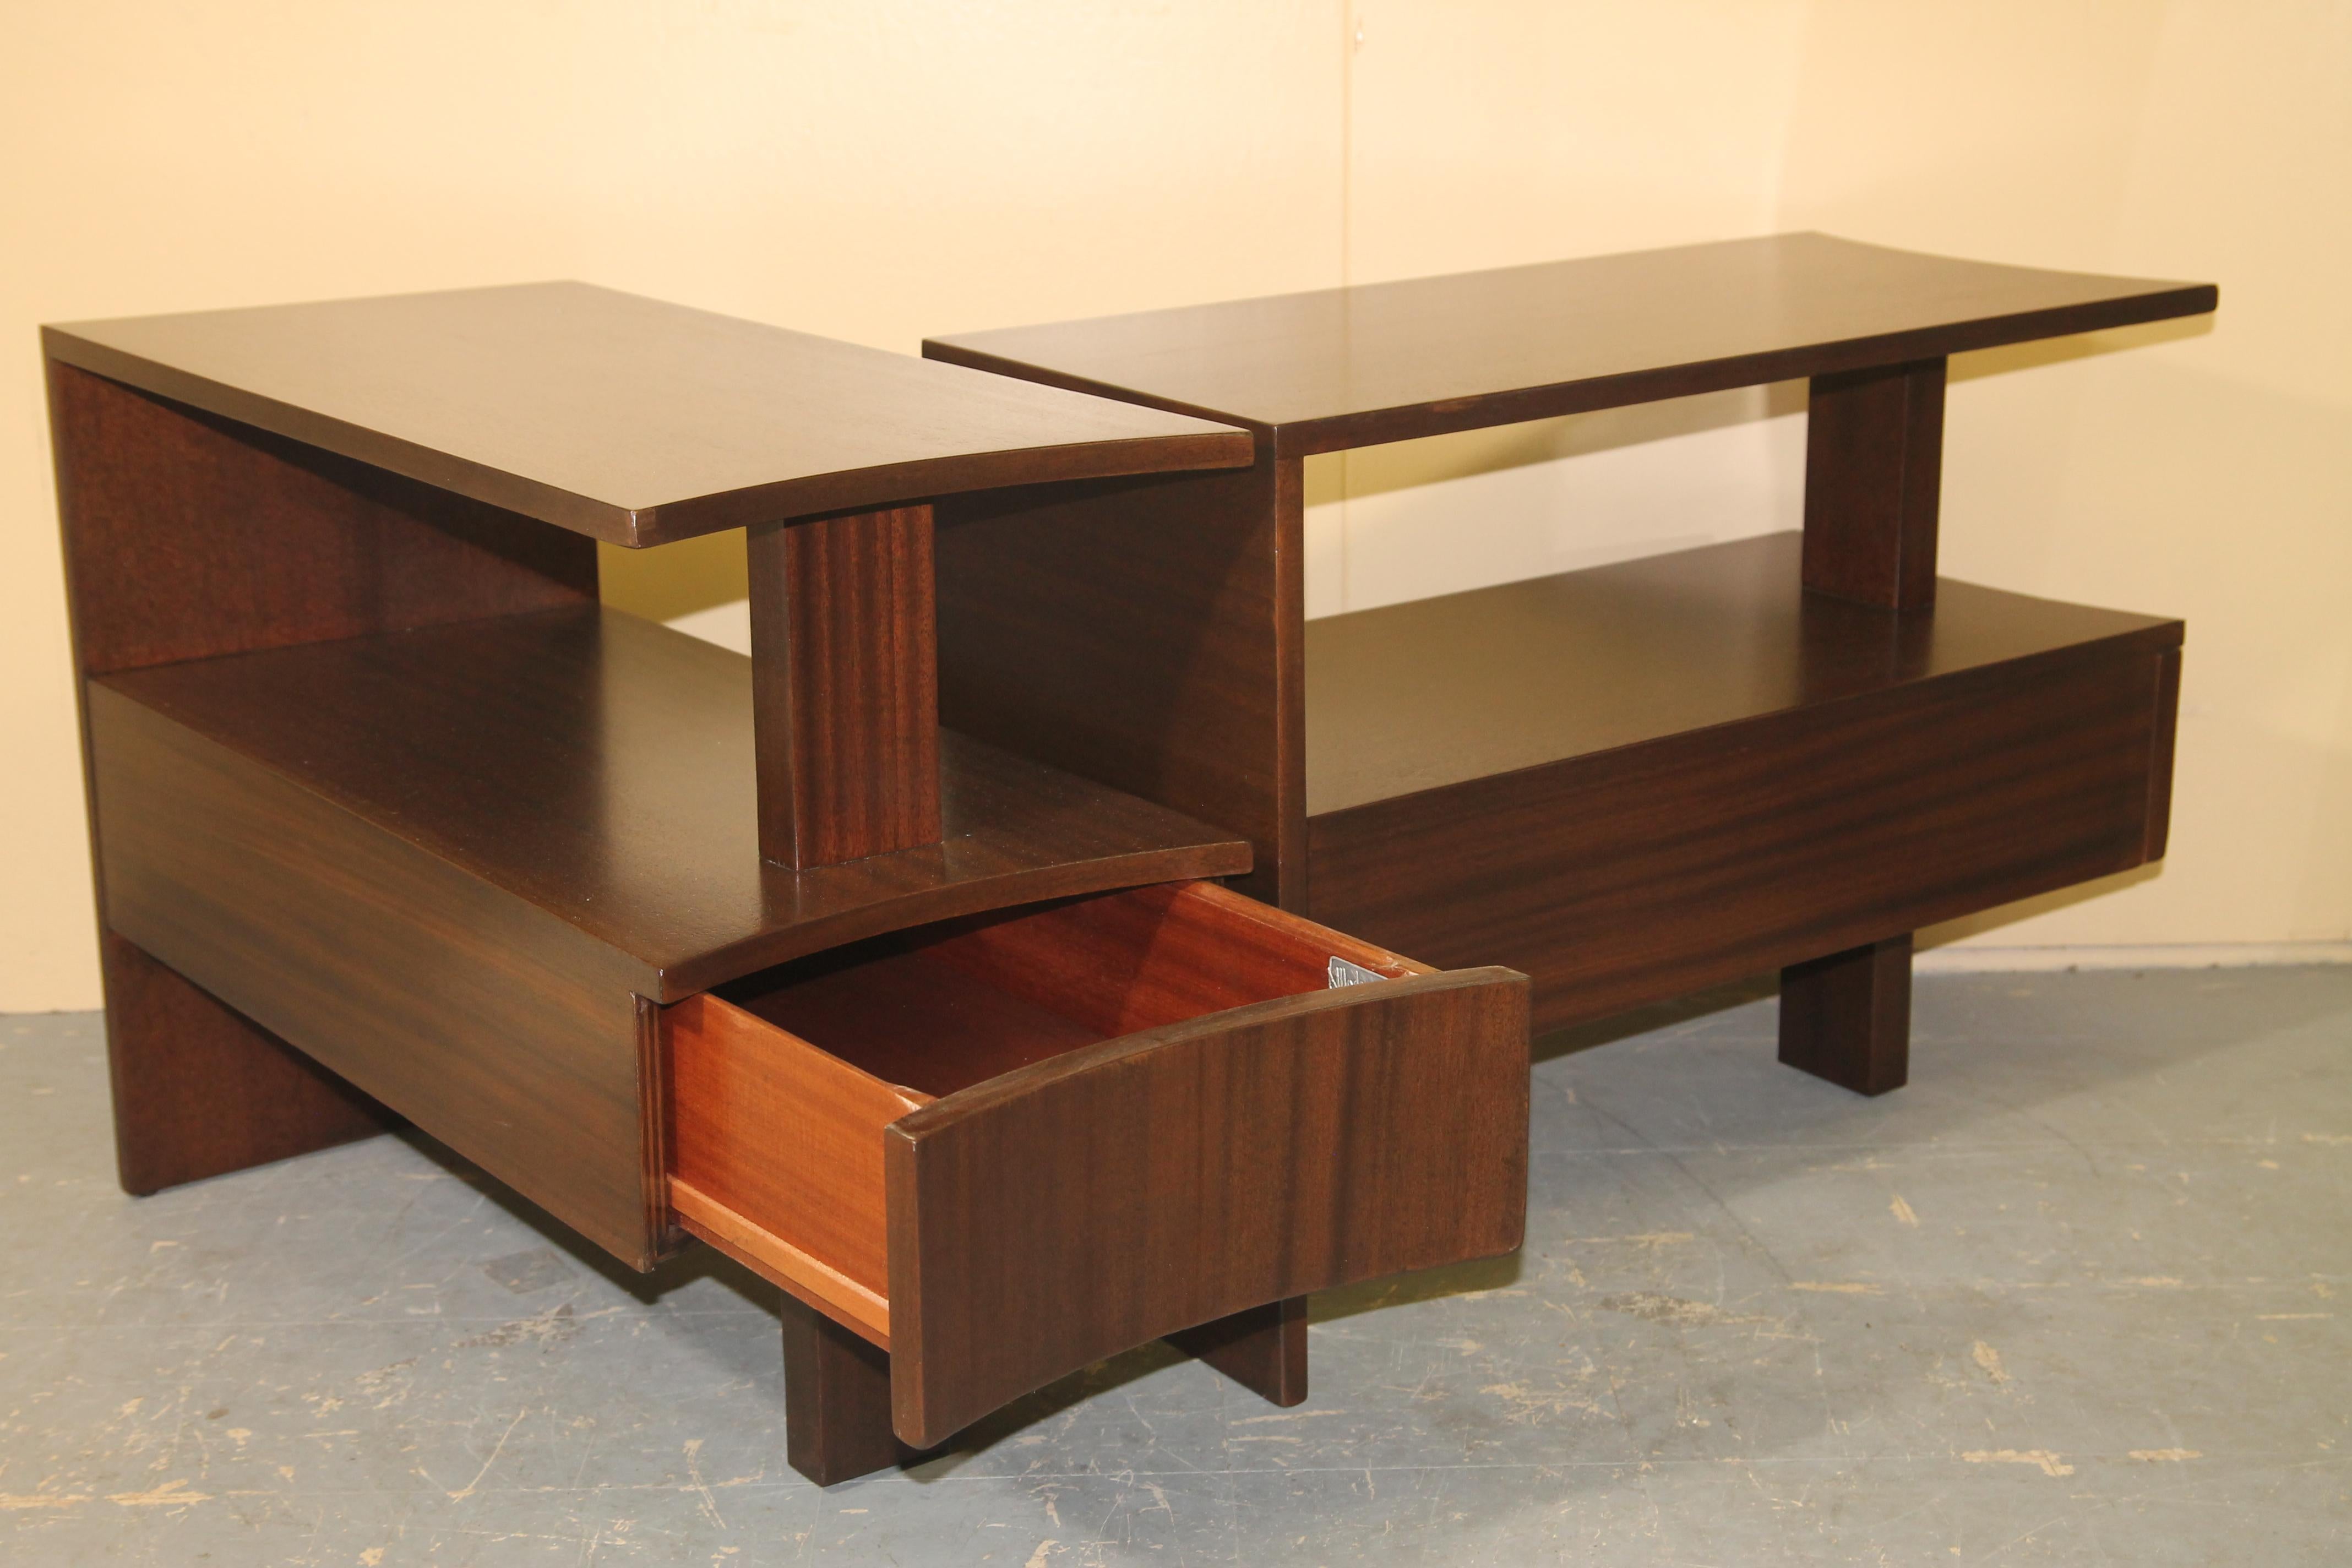 Pictures do not do these amazing and rare African Mahogany side tables from Modernage justice. I have had these beautiful tables restored and it is a design that I have not seen for sale on this or any other sites. You need to see these simple